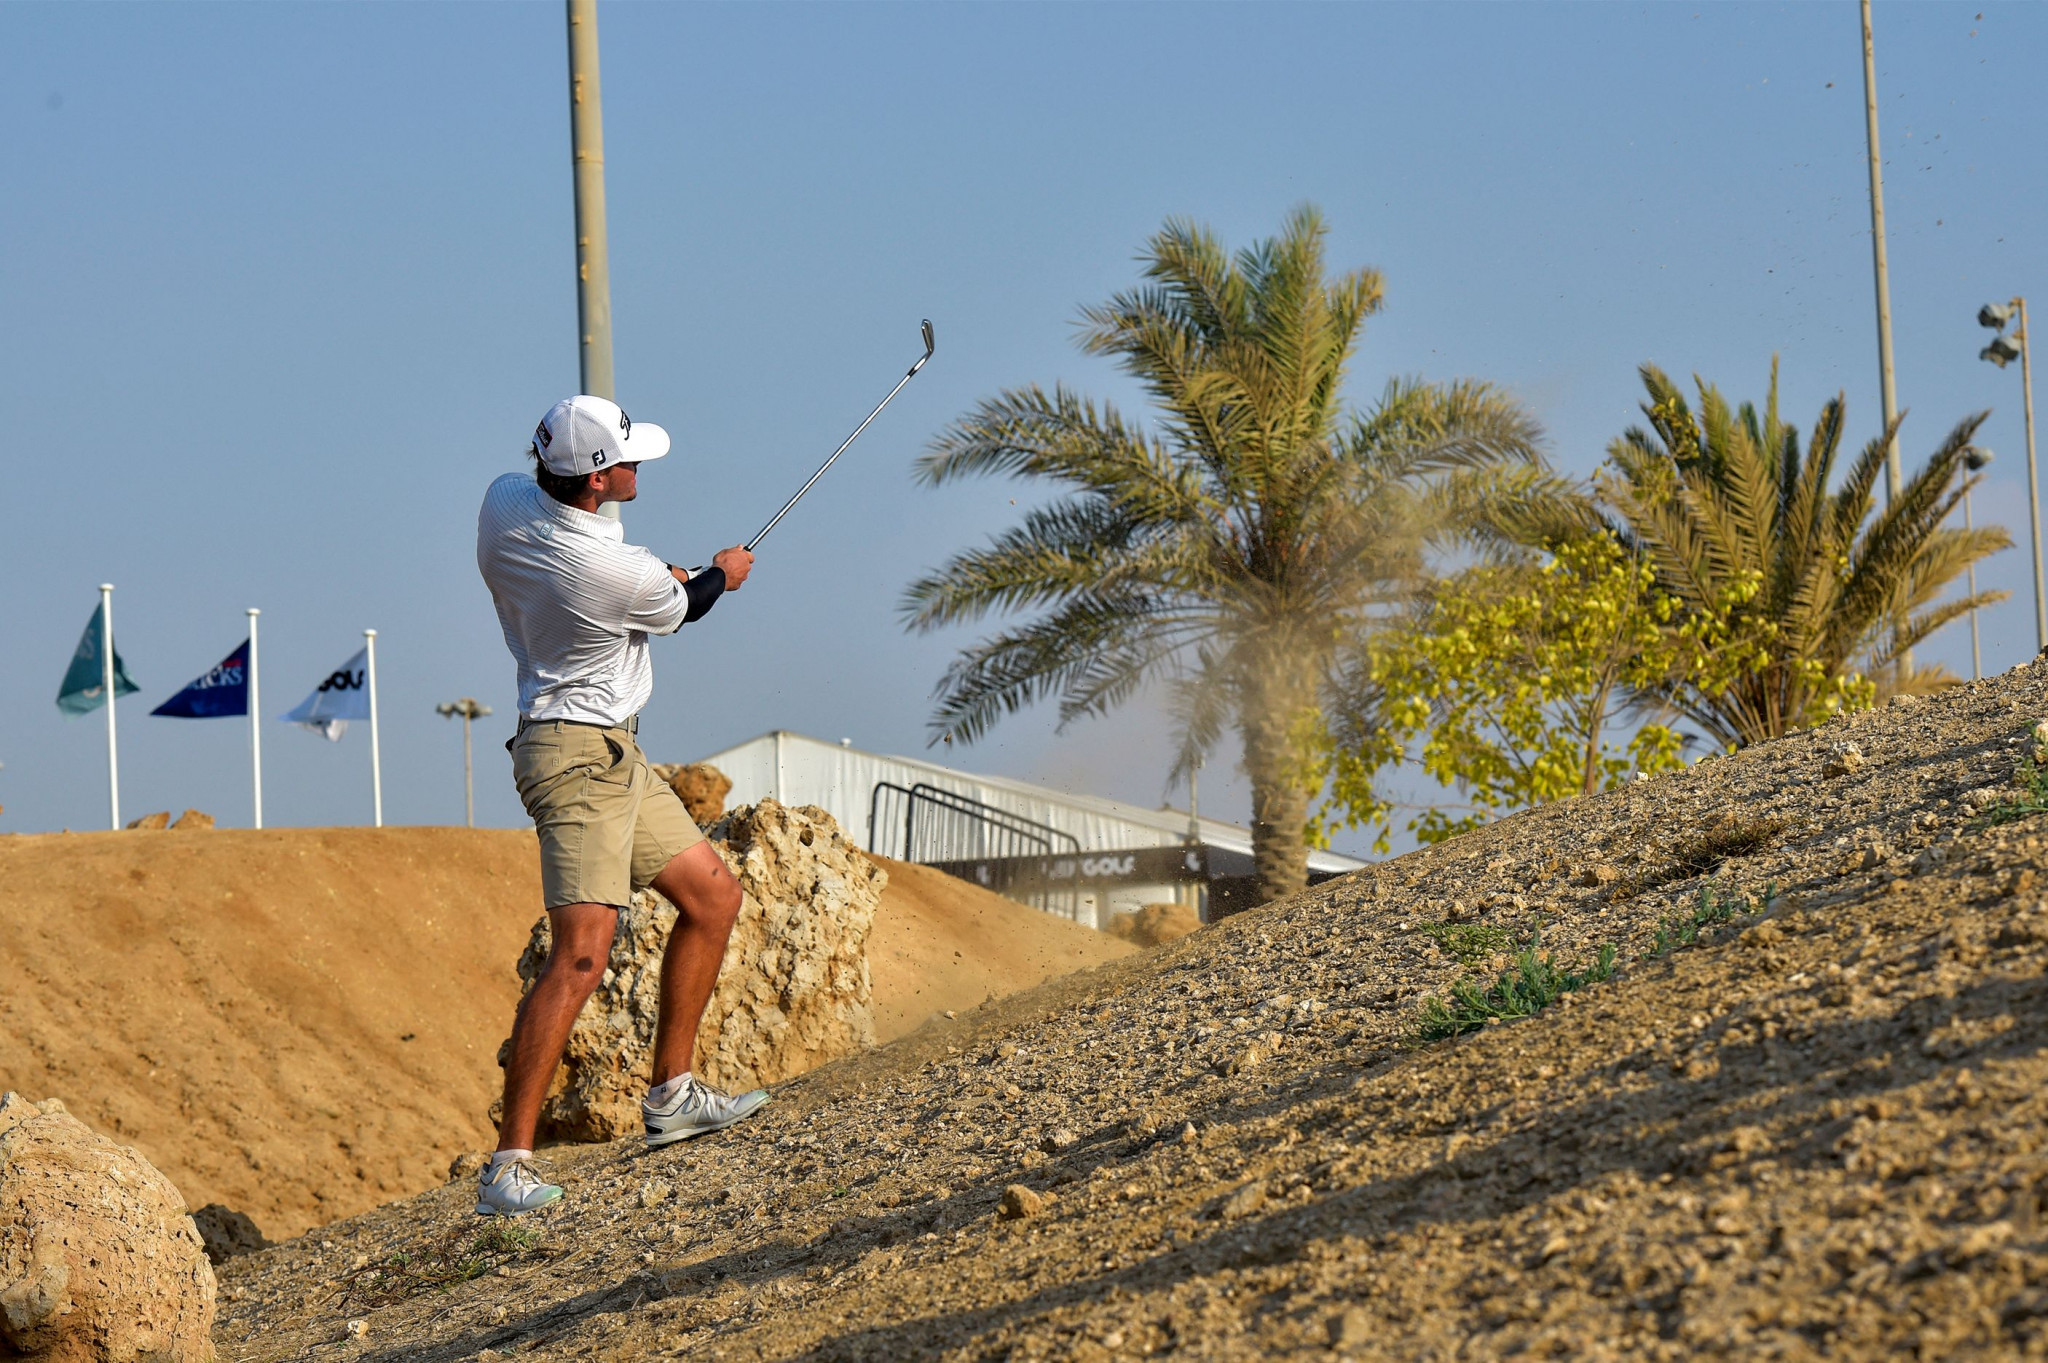 The LIV Golf Invitational in Jeddah is among the golf events to be held in Saudi Arabia this year ©Getty Images